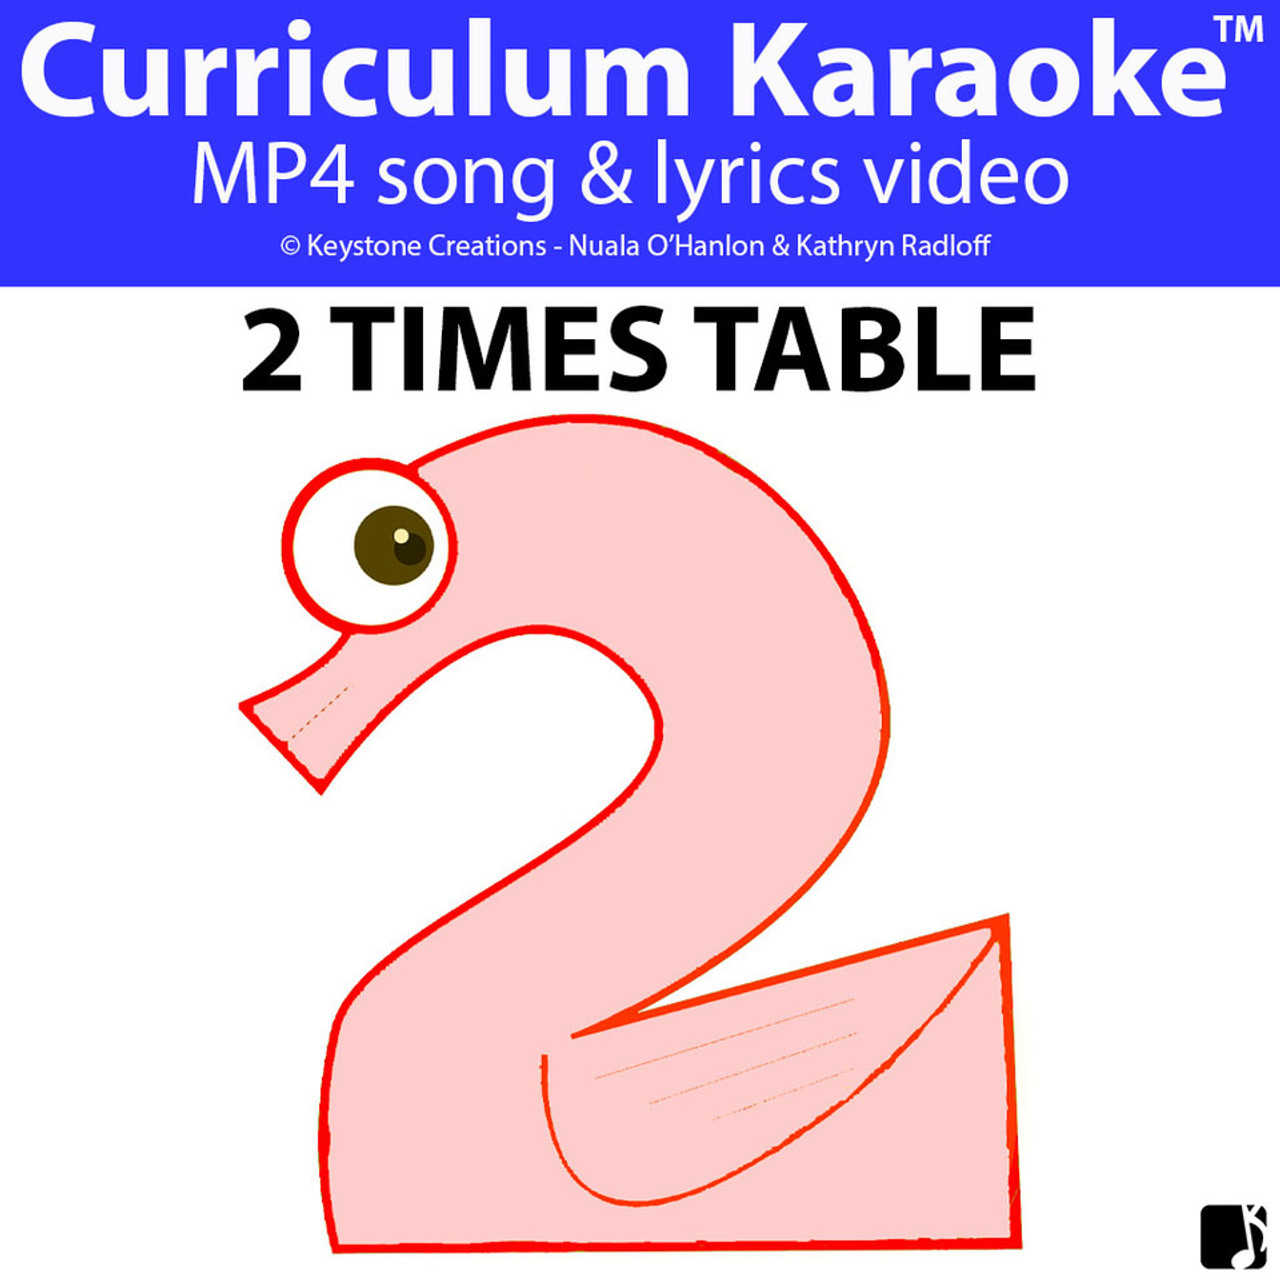 'TABLES TIME!' ~ Curriculum Karaoke™: 5 Song Videos Bundle & Lesson Materials